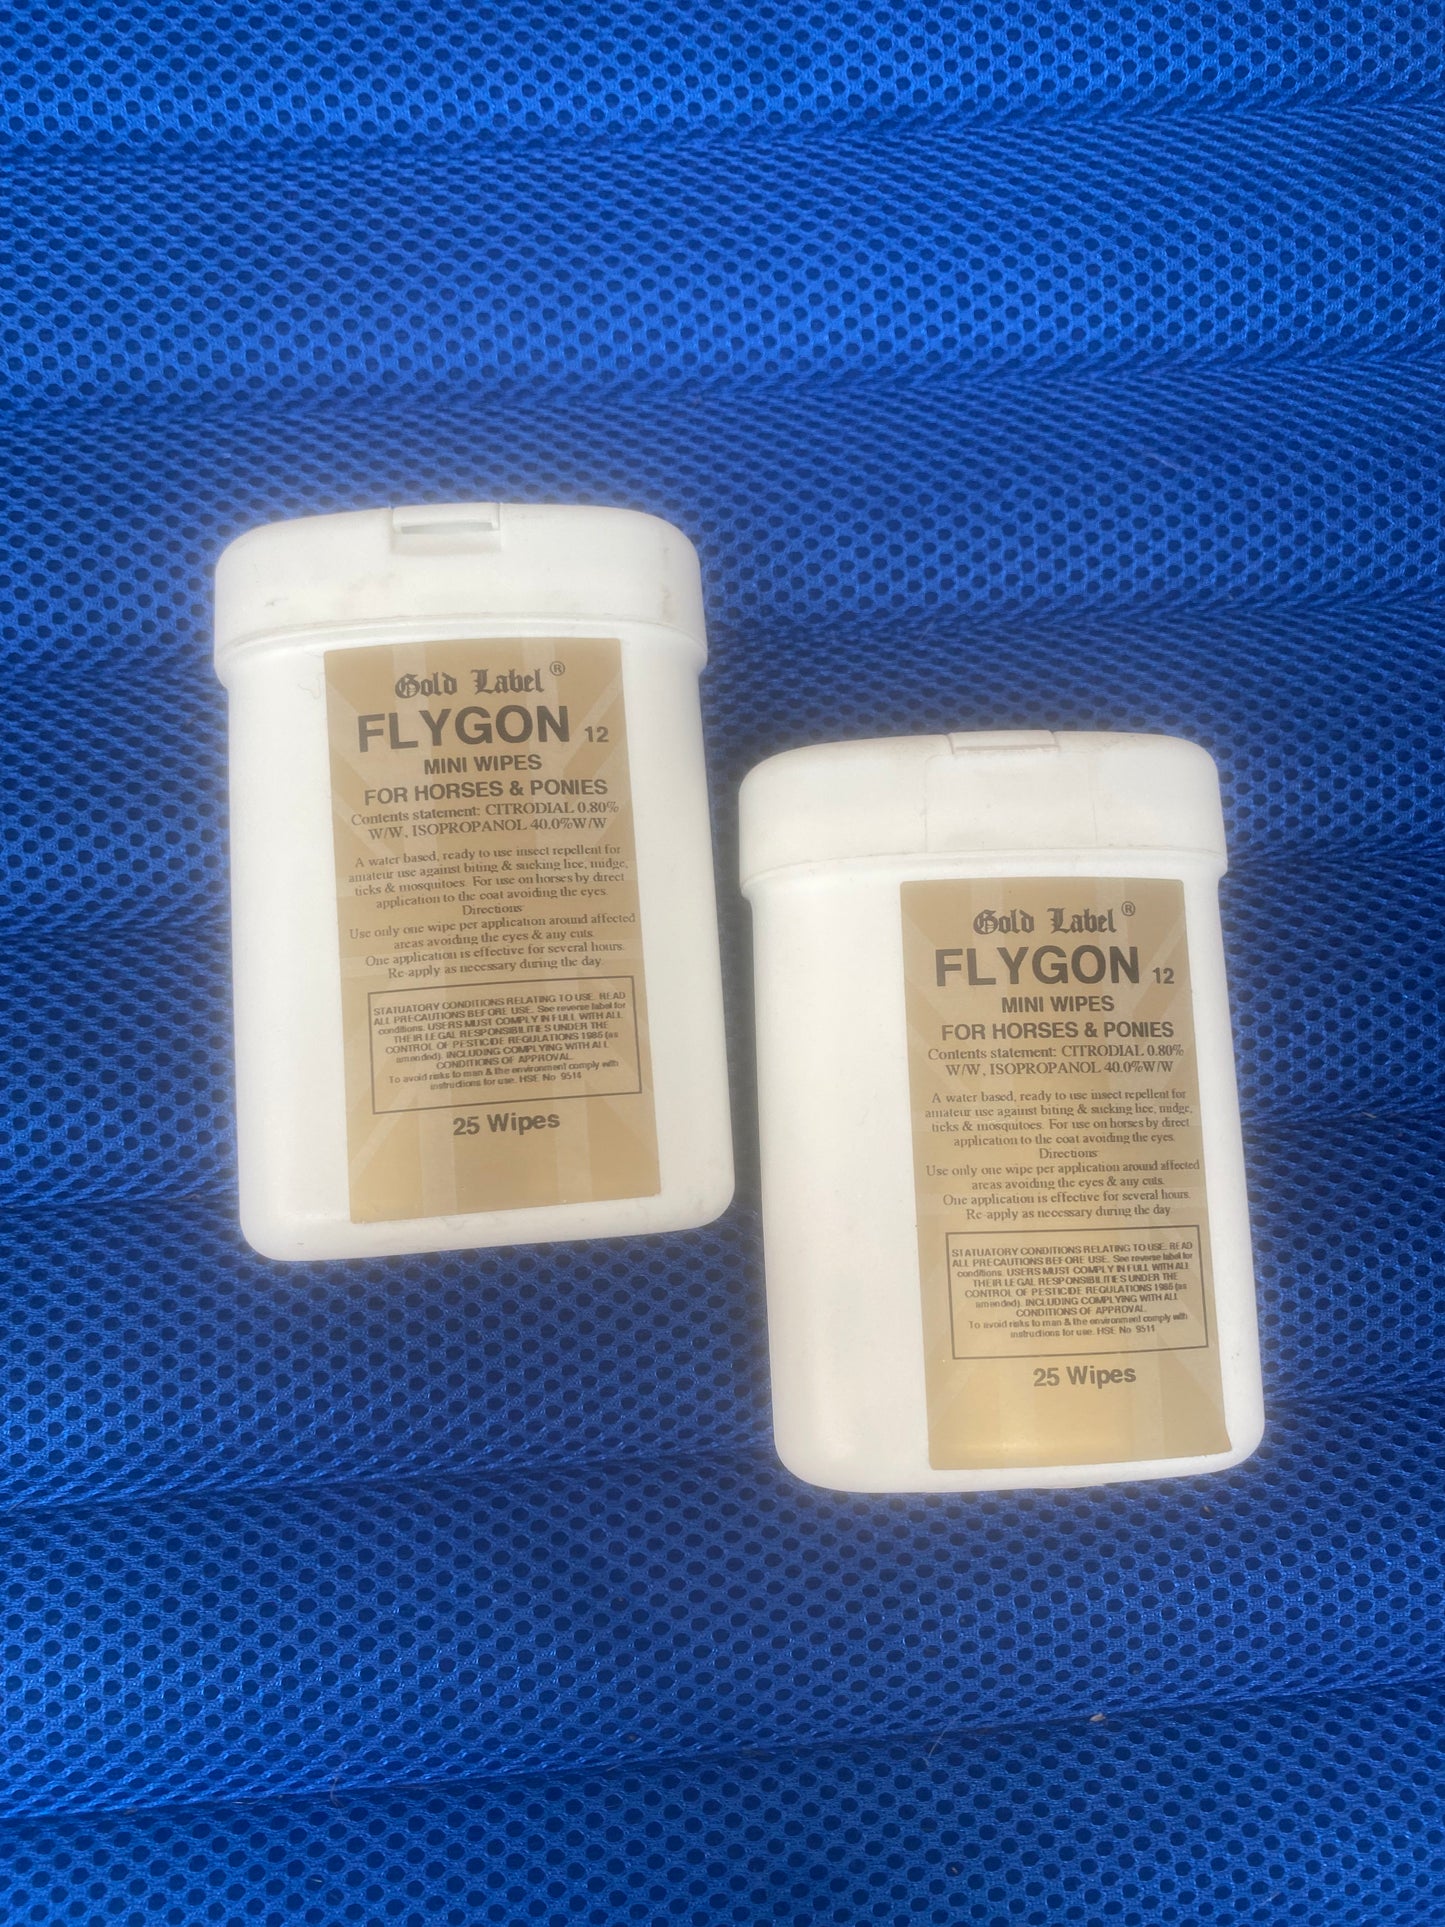 Fly gon wipes set of 2 FREE POSTAGE🟢